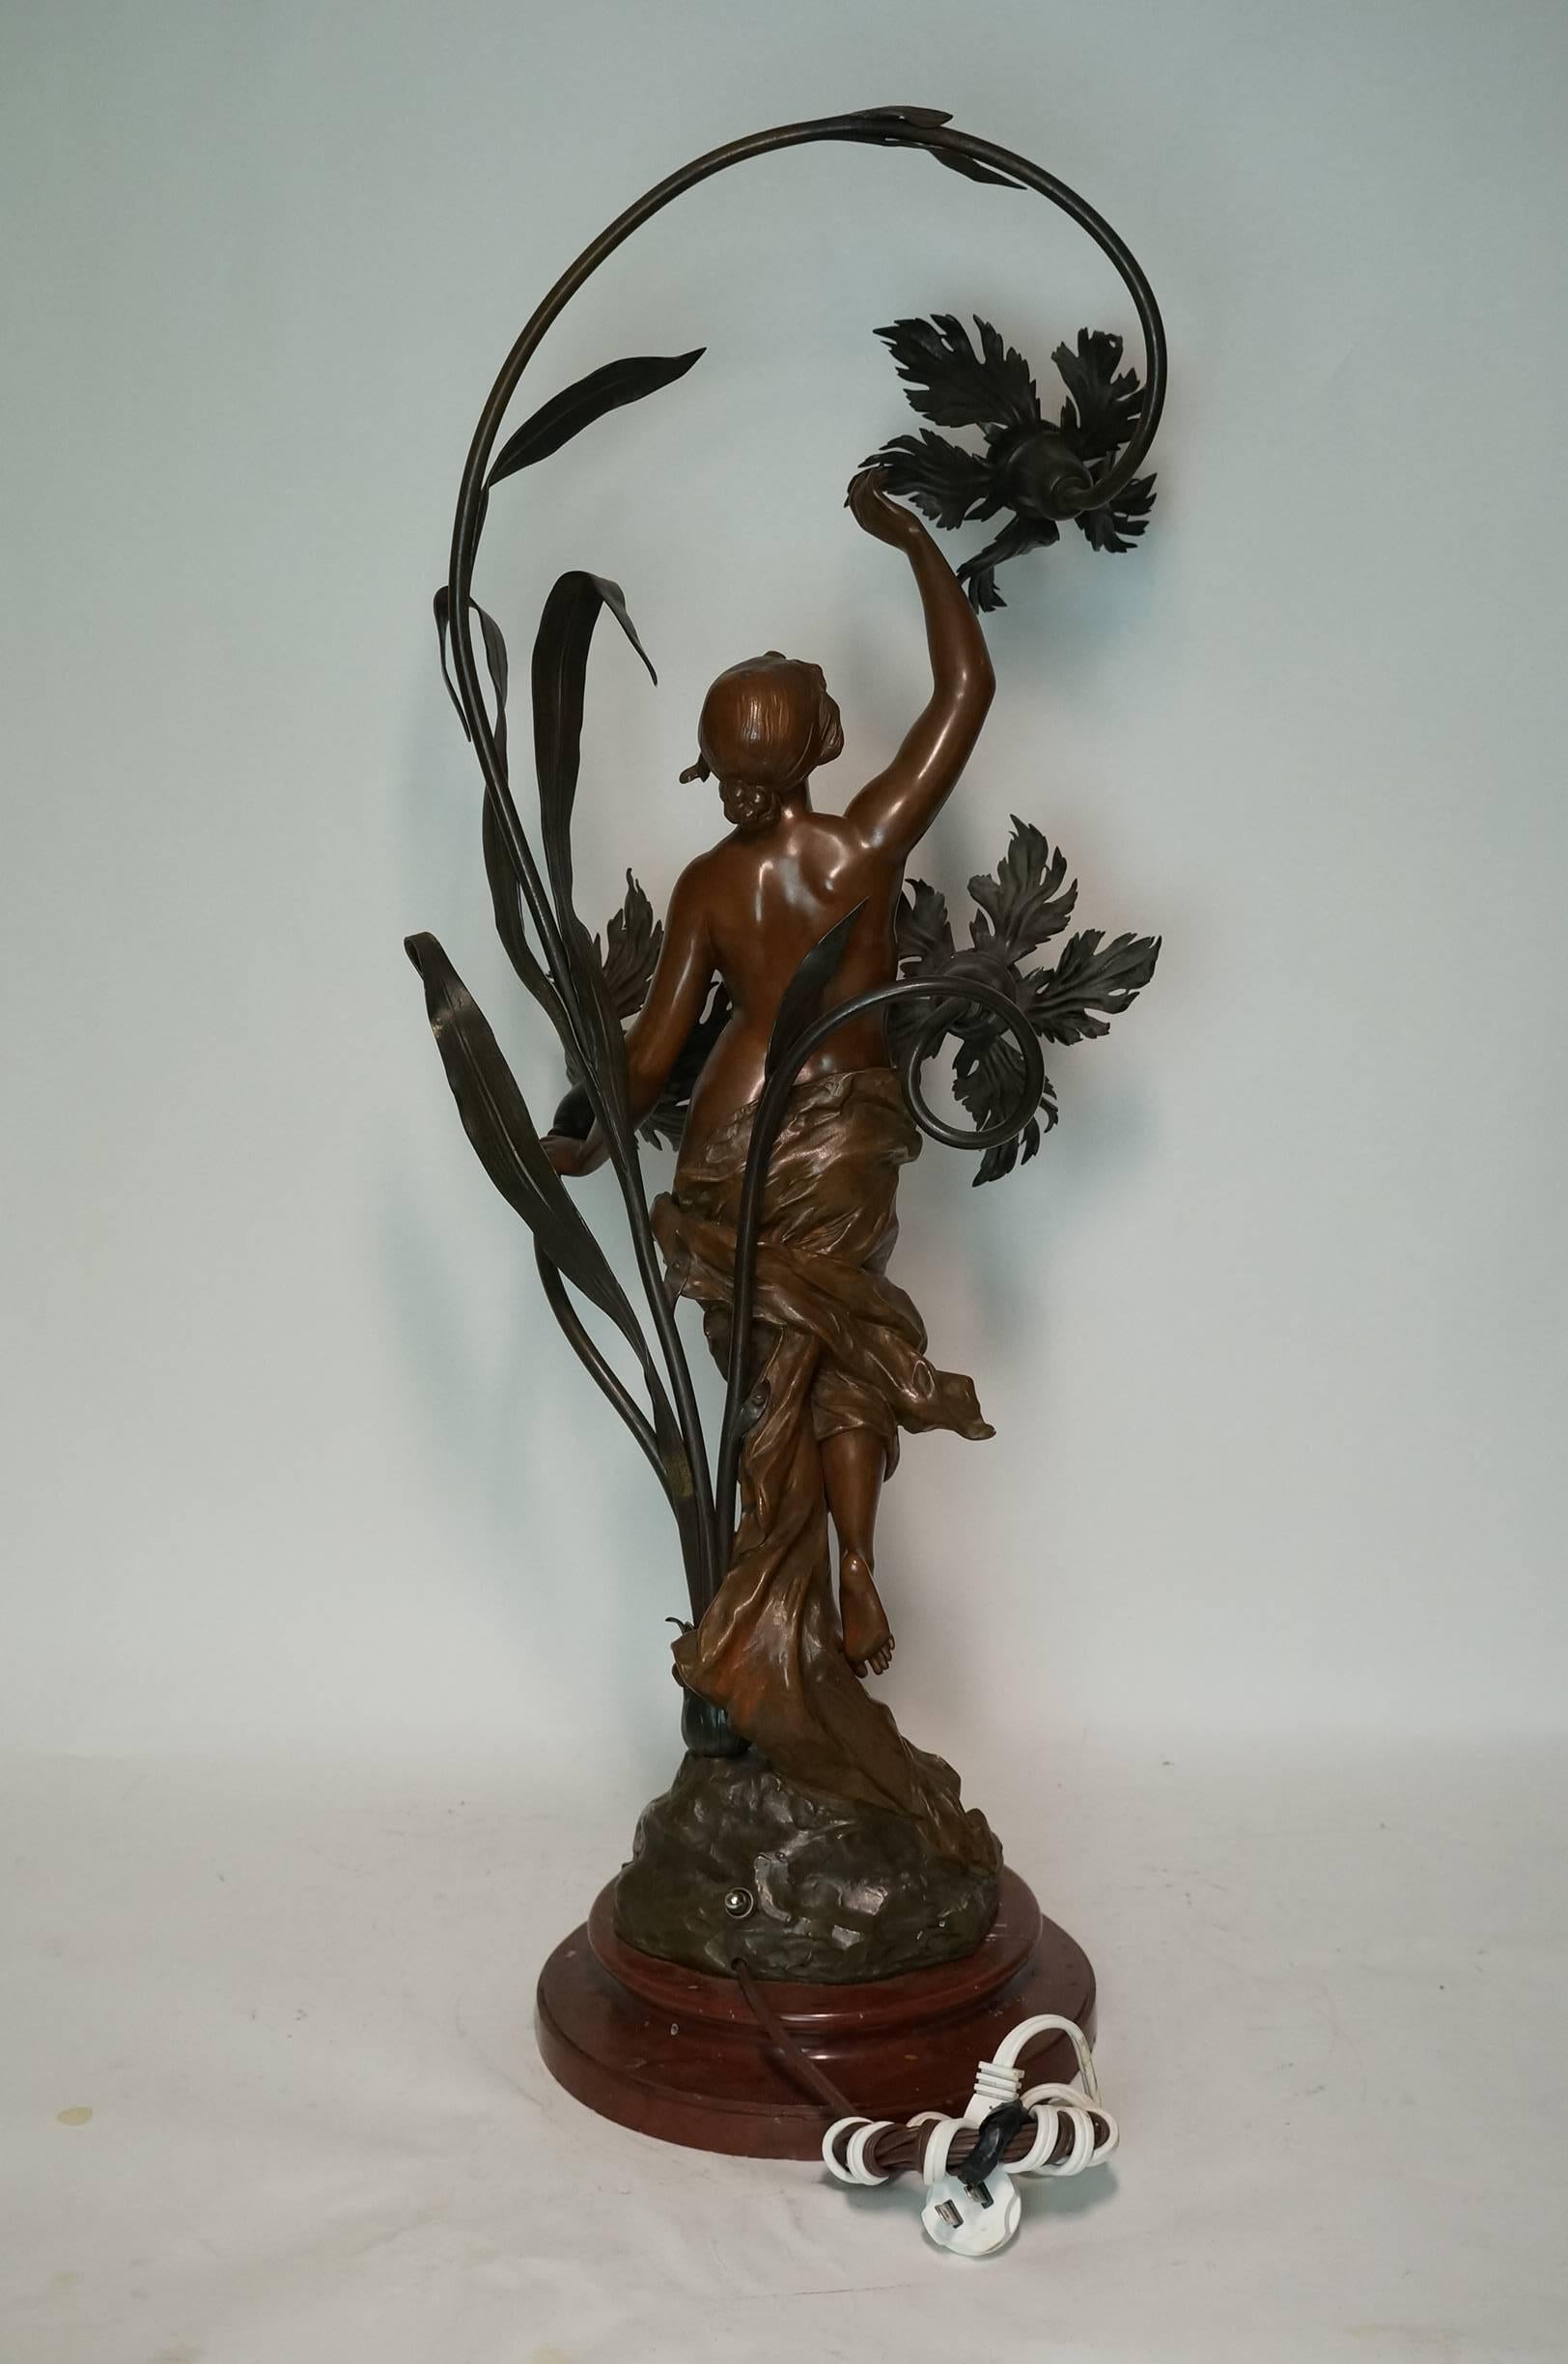 French 19 century Art Nouveau patinated bronze figural three-light table lamp on a rouge marble base .
Stock number: LL39.